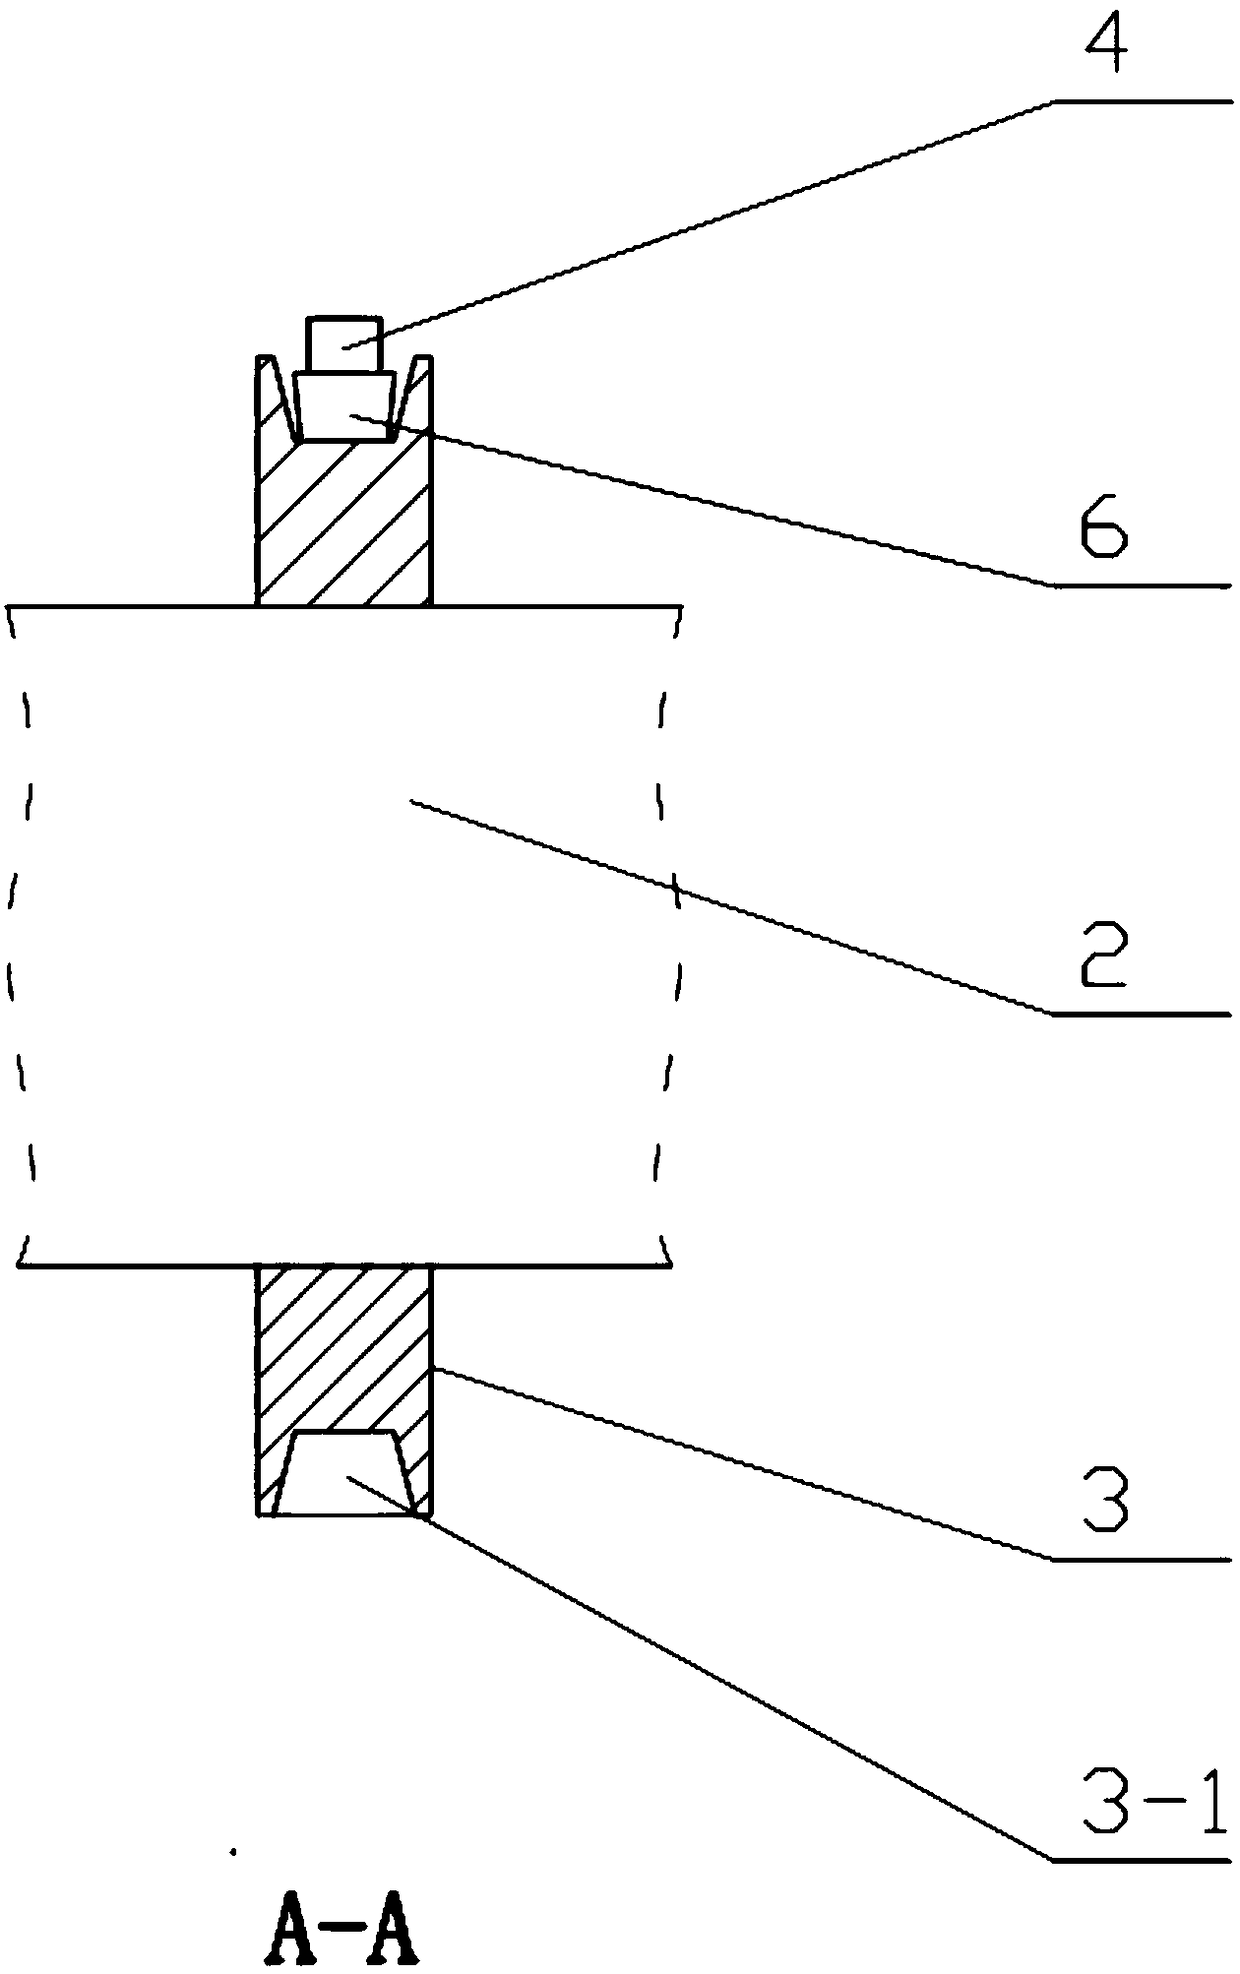 A-shaped-frame winder with detachable braking device